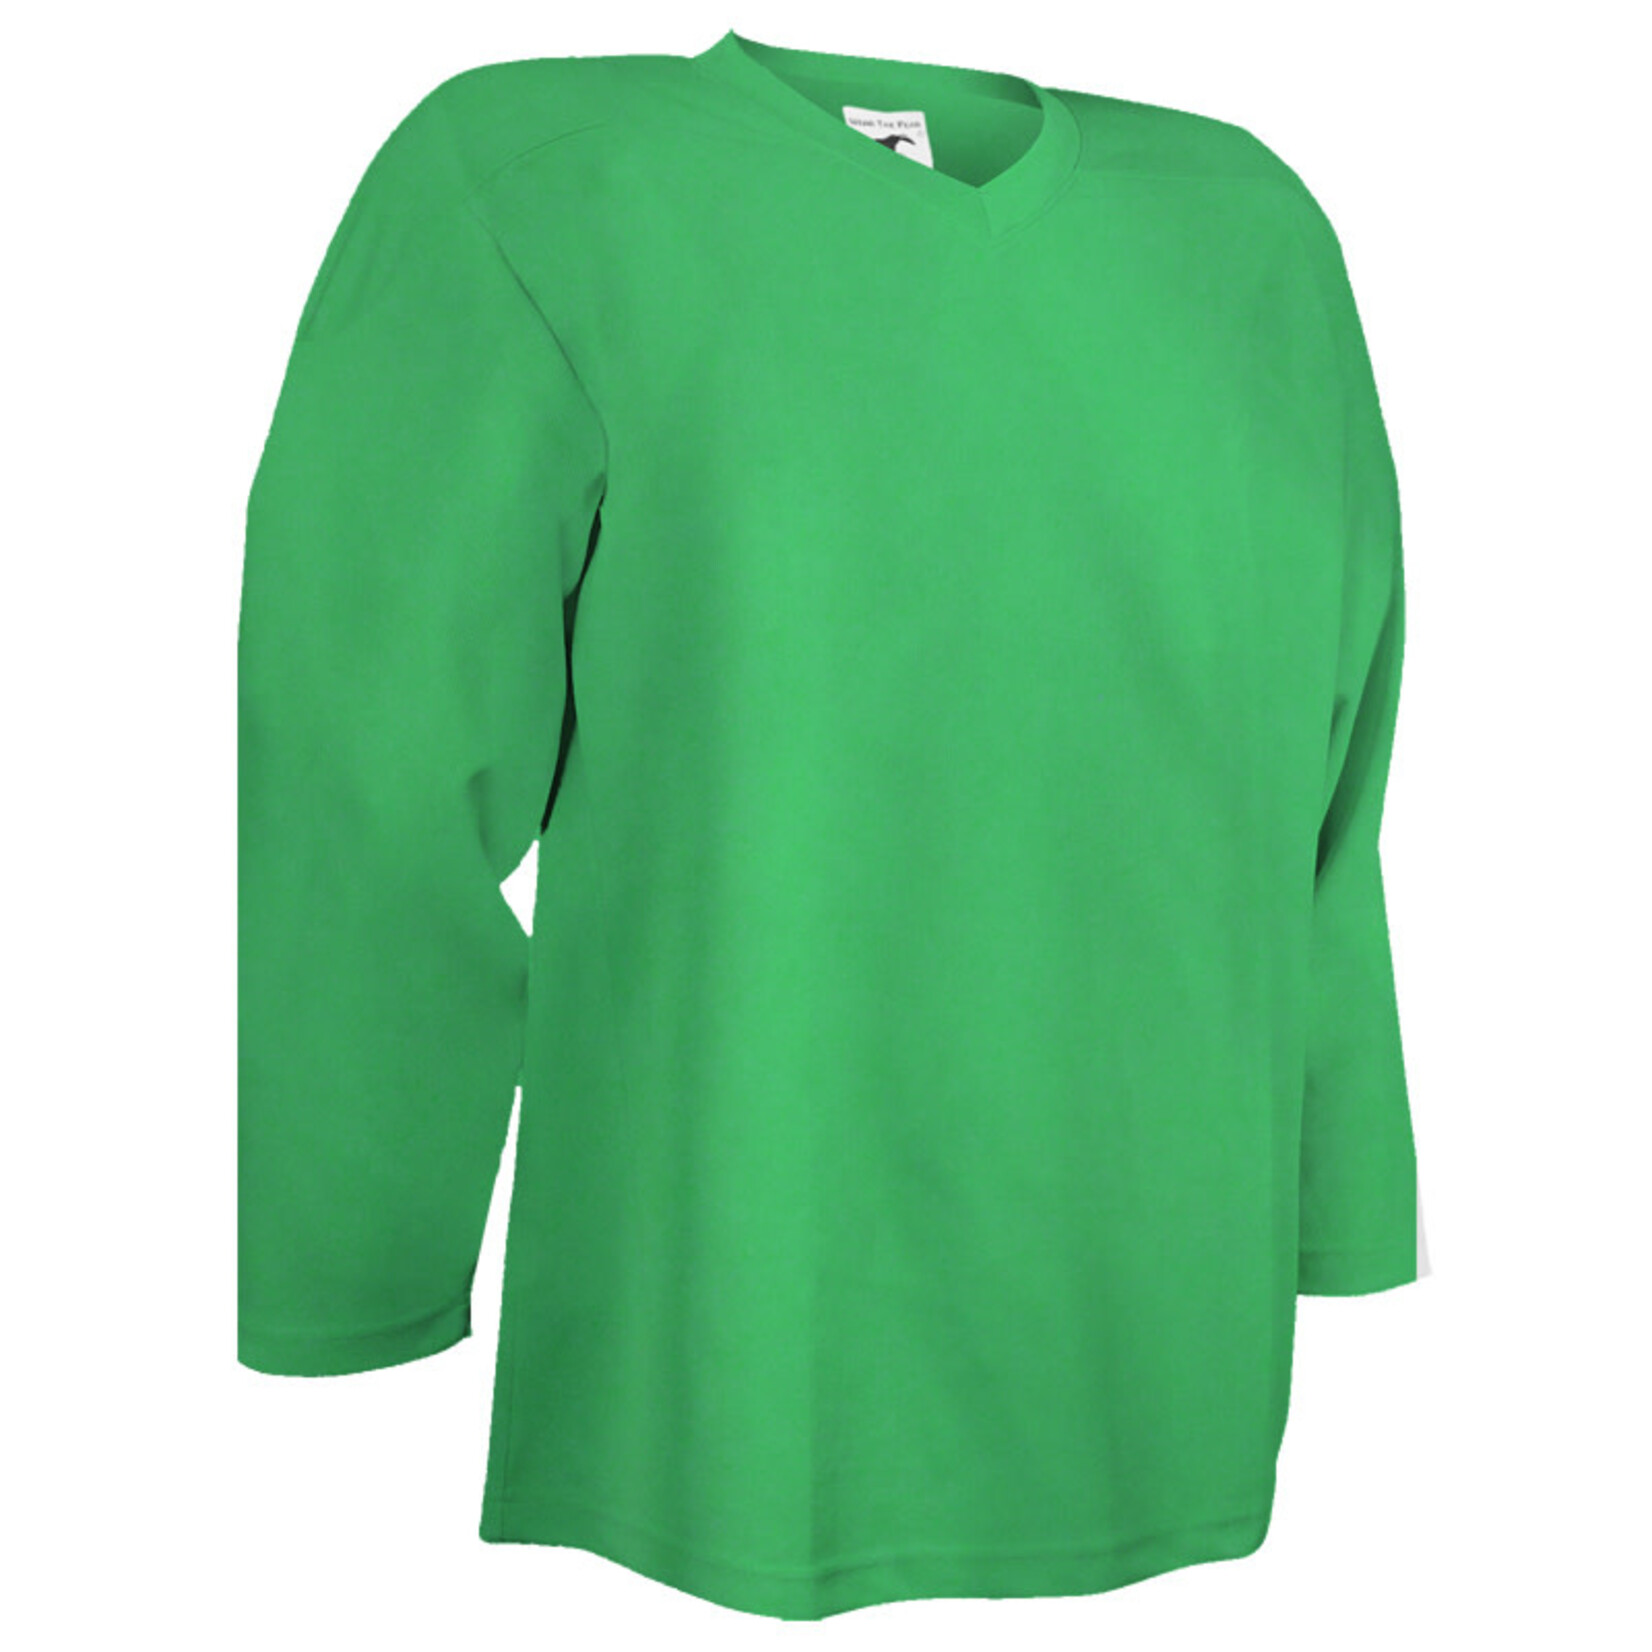 Pear Sox Pear Sox Air Mesh Practice Jersey (YOUTH KELLY GREEN)